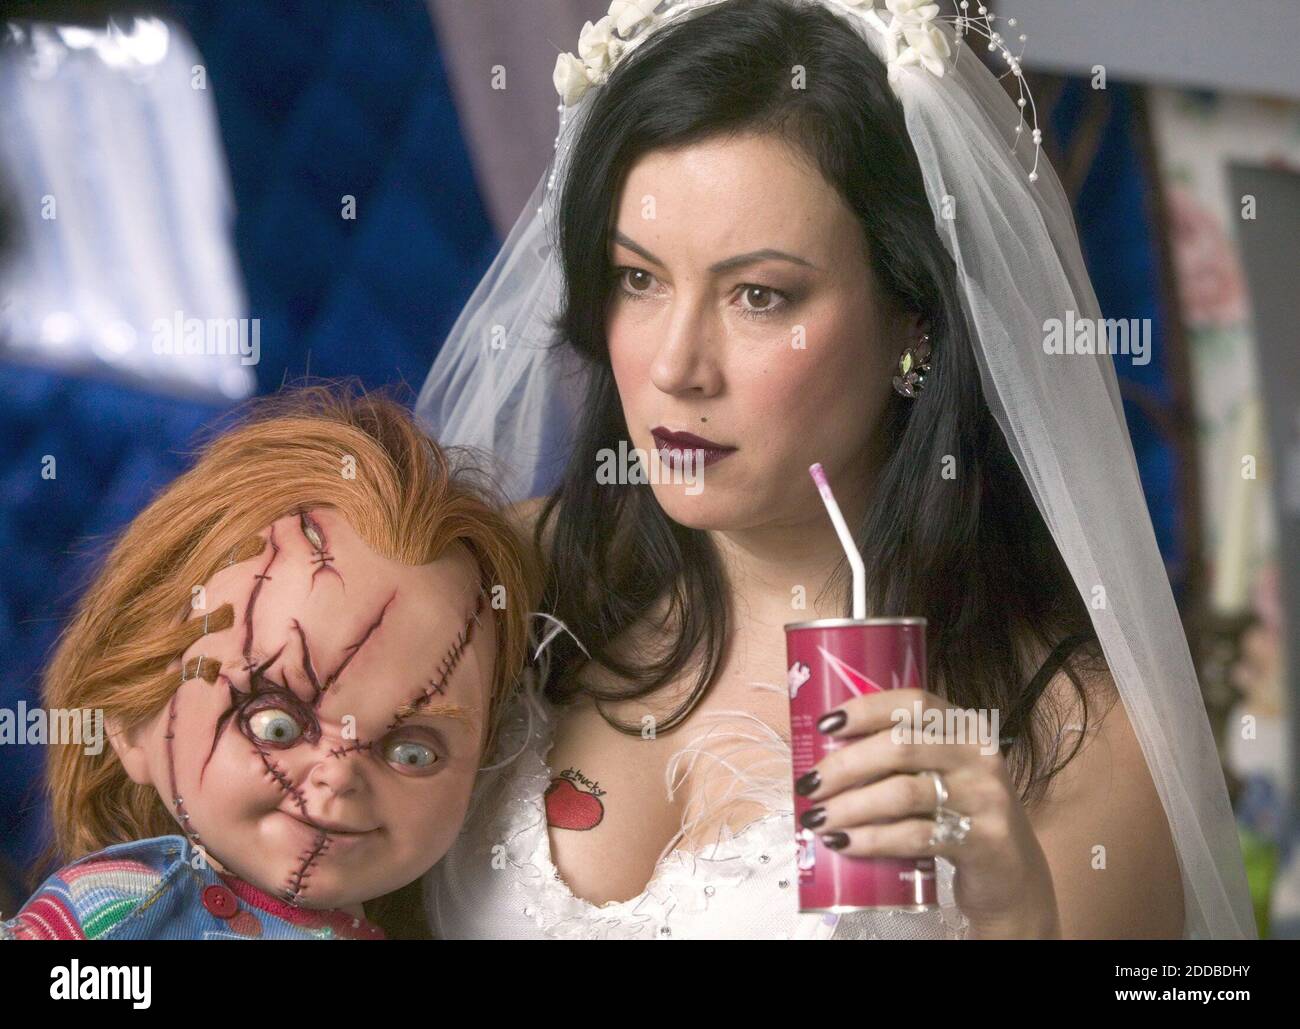 NO FILM, NO VIDEO, NO TV, NO DOCUMENTARY - Chucky and Jennifer Tilly star in -Seed of Chucky.- Photo by Rolf Konow/Rogue pictures/KRT/ABACA. Stock Photo